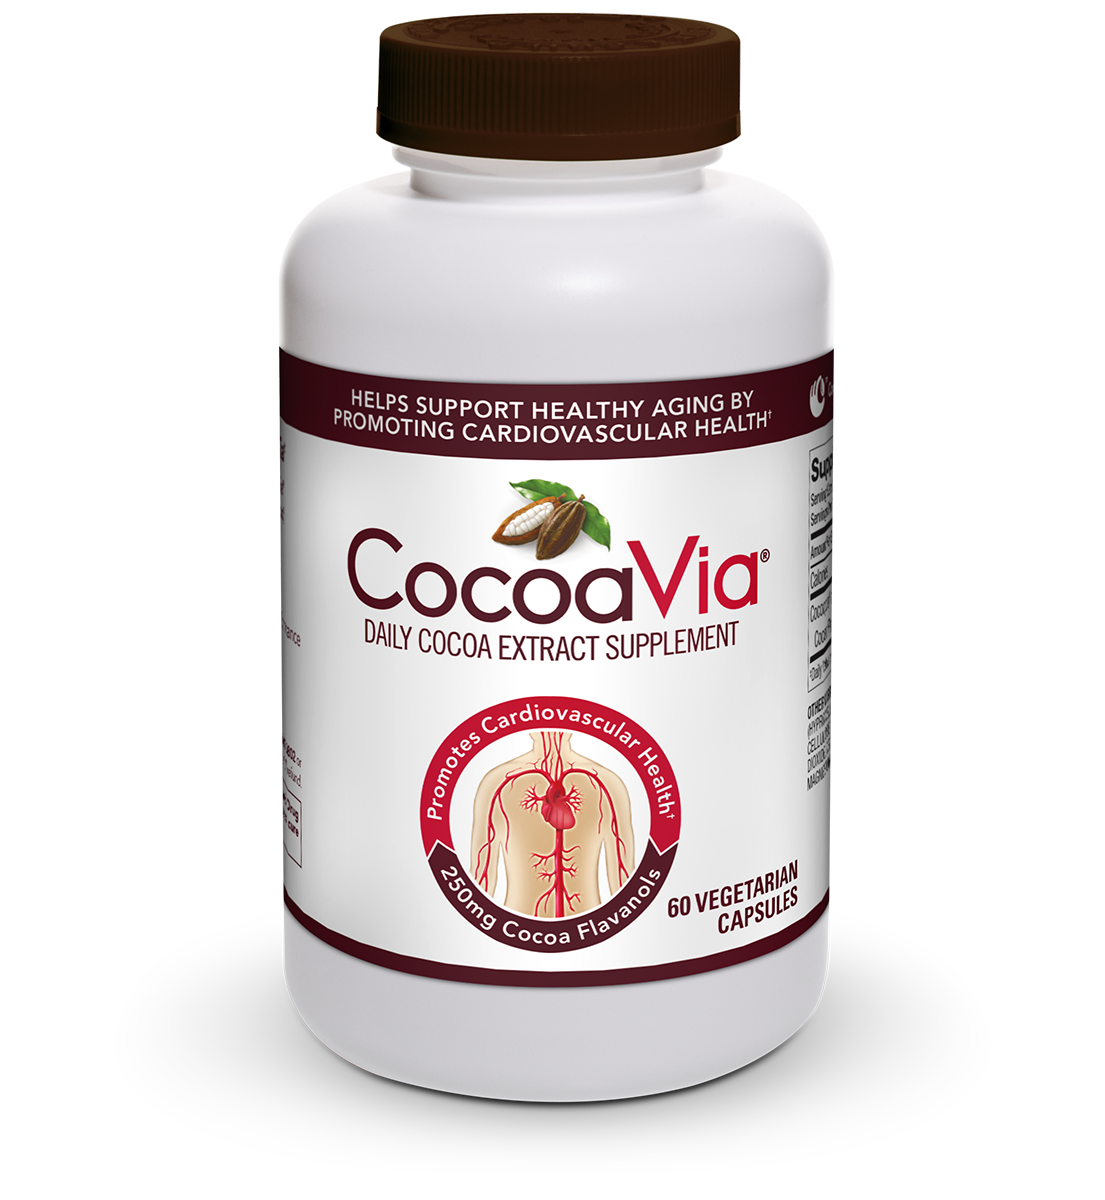 Expo East Review: Cocoa Capsules